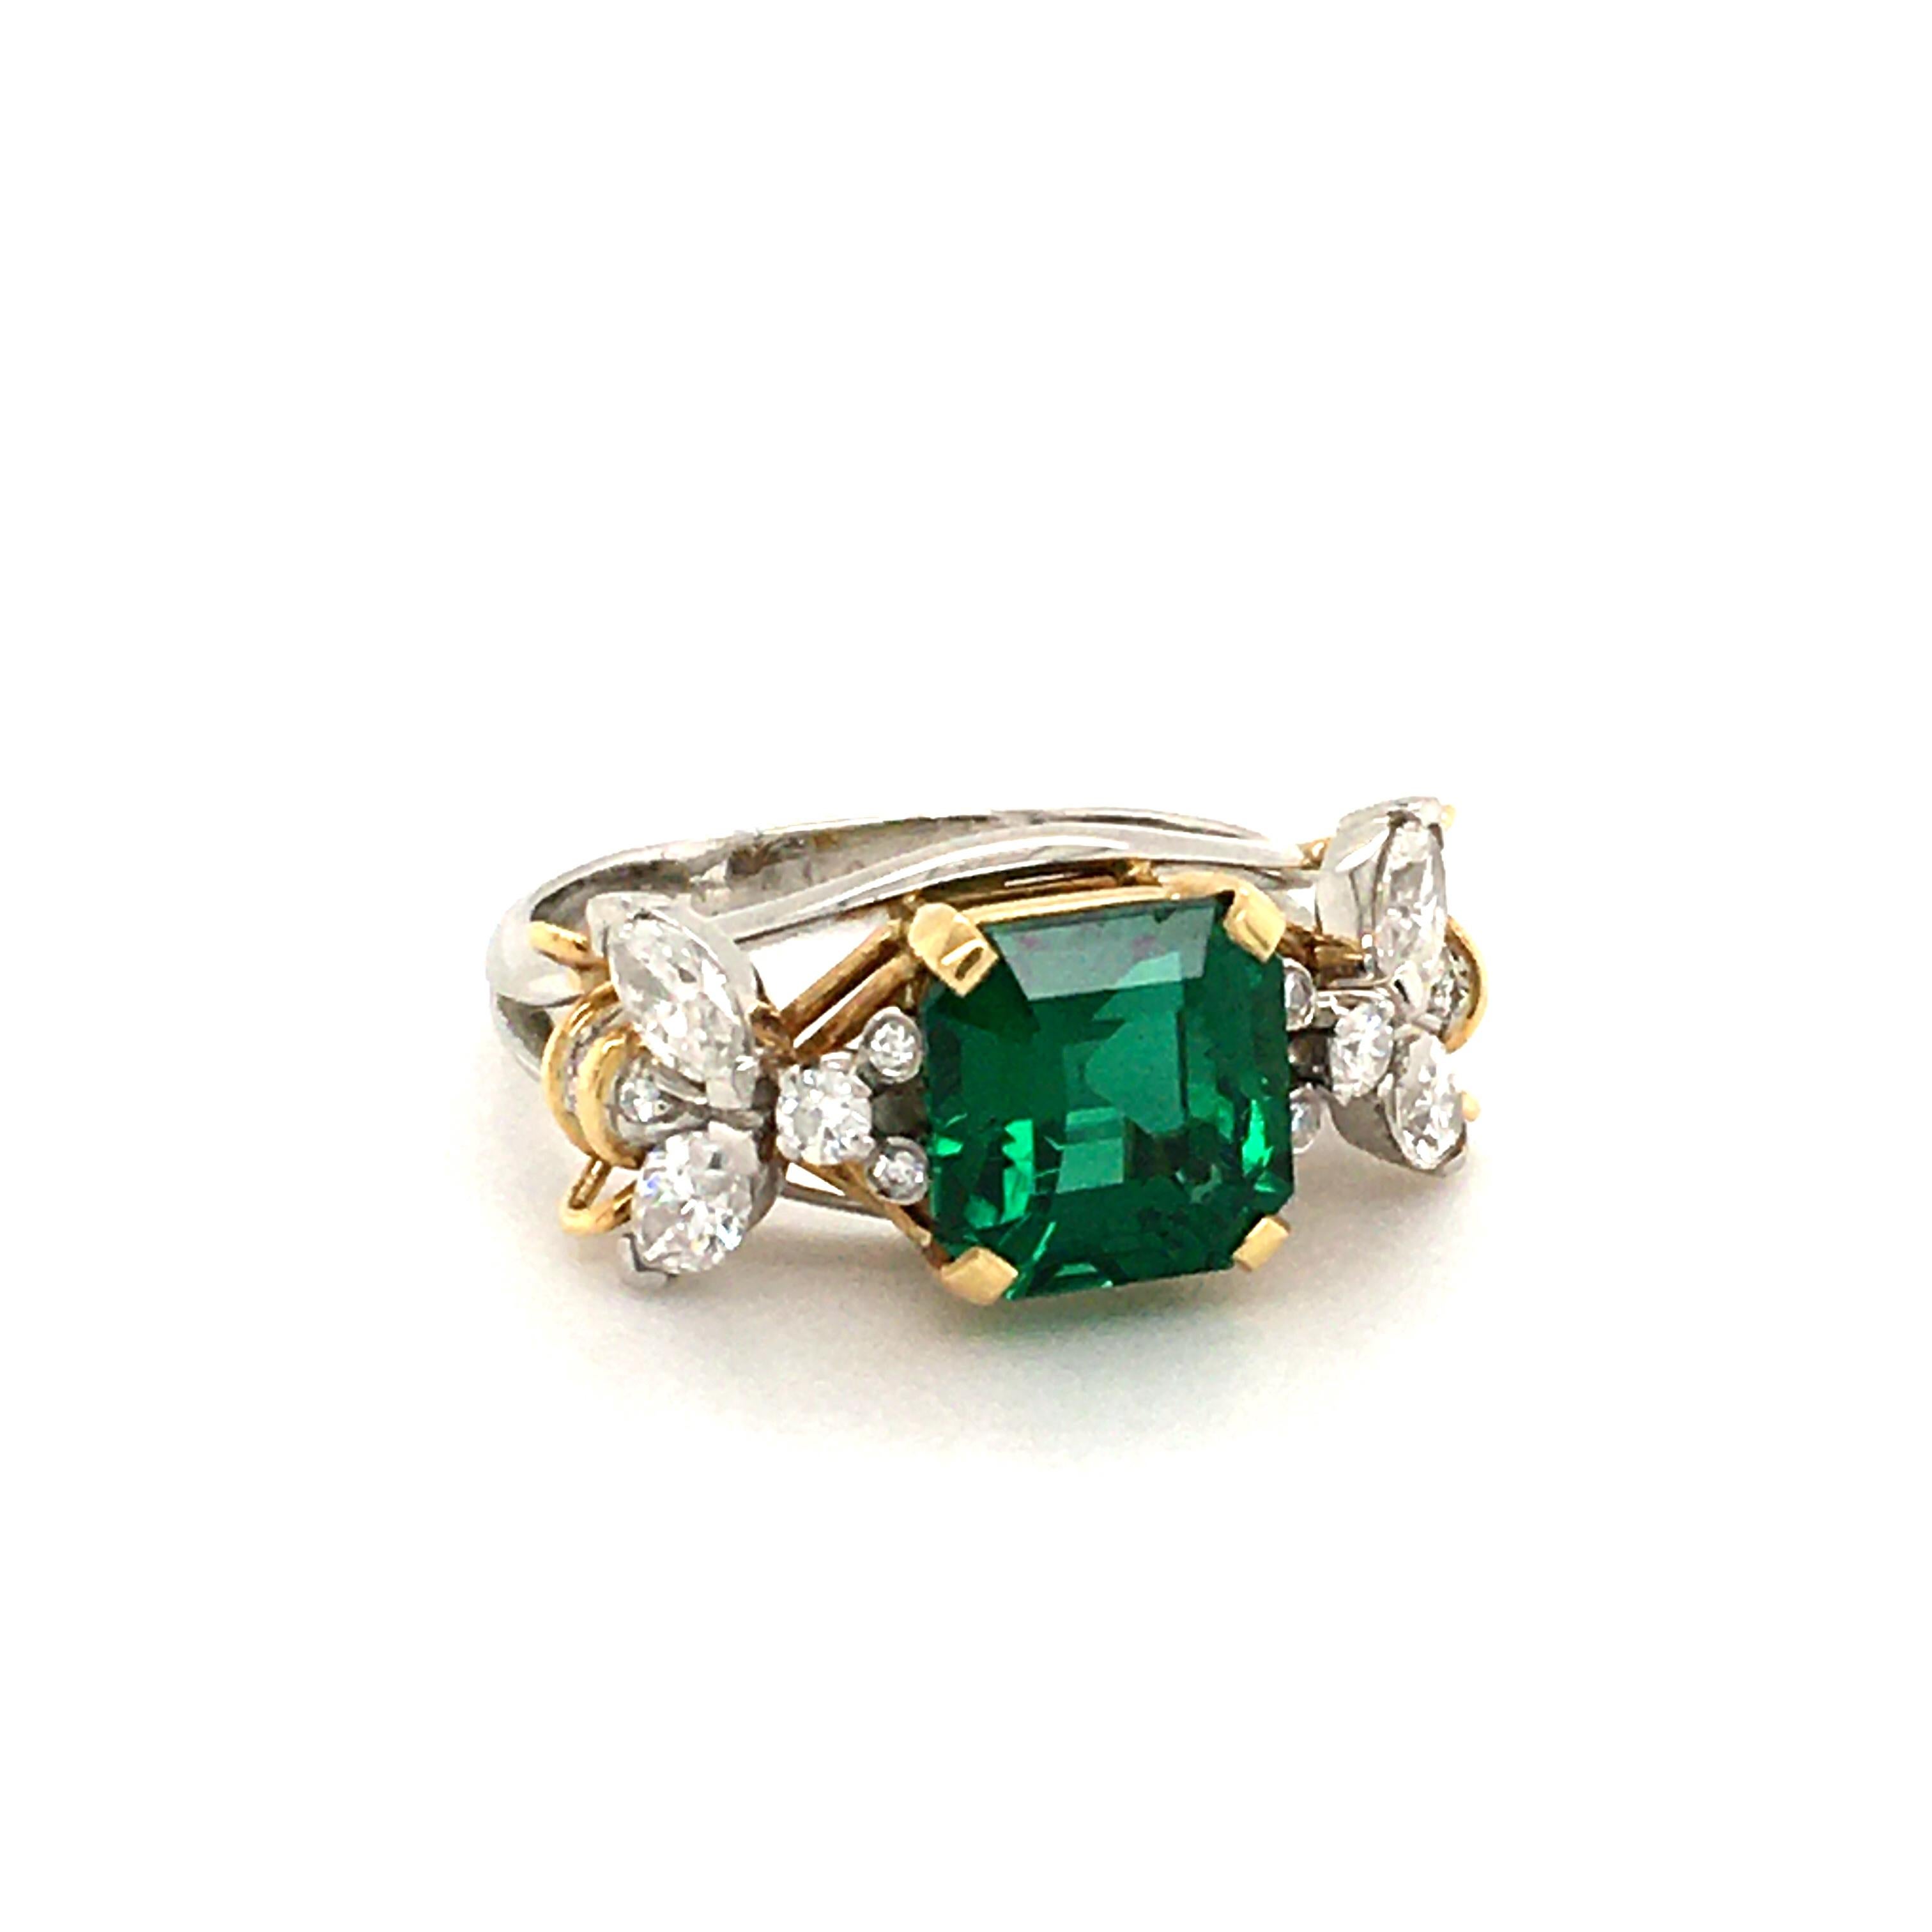 Set with a certified unenhanced octagonal-cut emerald weighing 3.26 carats. Flanked on either side by sculpted circular and marquise-cut diamond bees, each with polished gold wire details. Mounted in platinum and 18k gold

Accompanied by SSEF